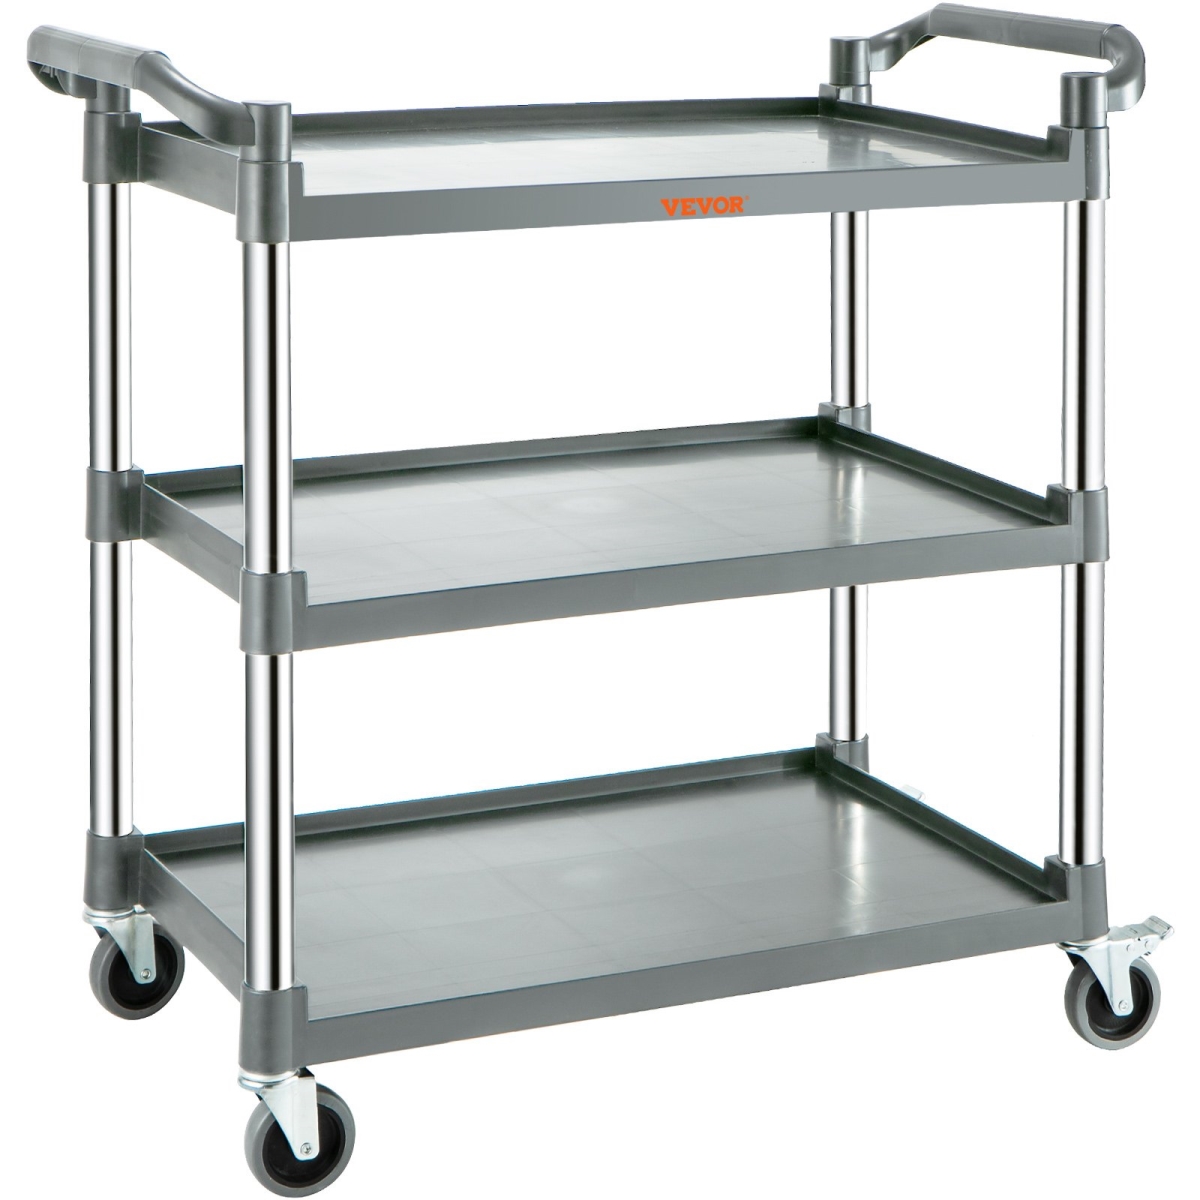 Picture of Vevor FW101X49X98CMRM6WV0 Utility Service Cart with Wheels 3-Tier Food Service Cart - 220 lbs